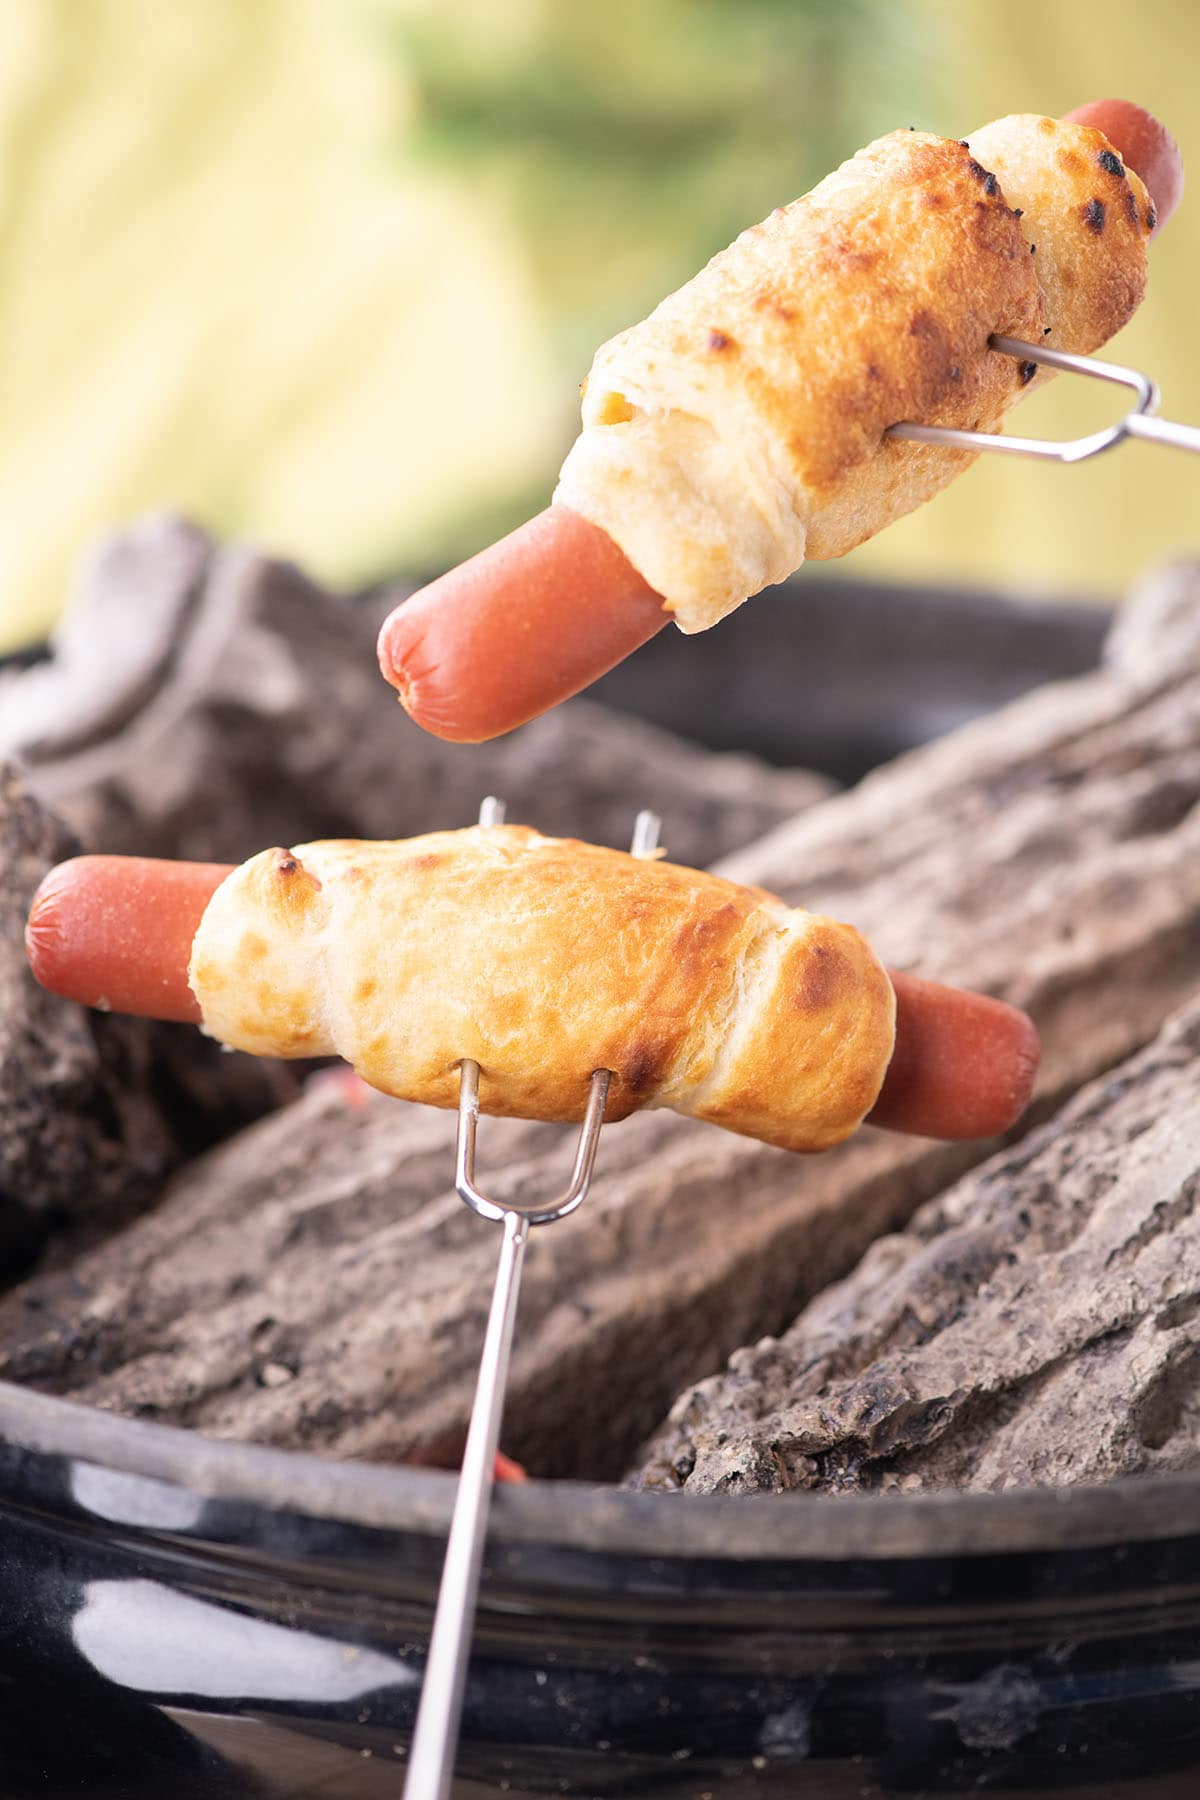 cooking 2 hot dogs wrapped with dough using a skewers.